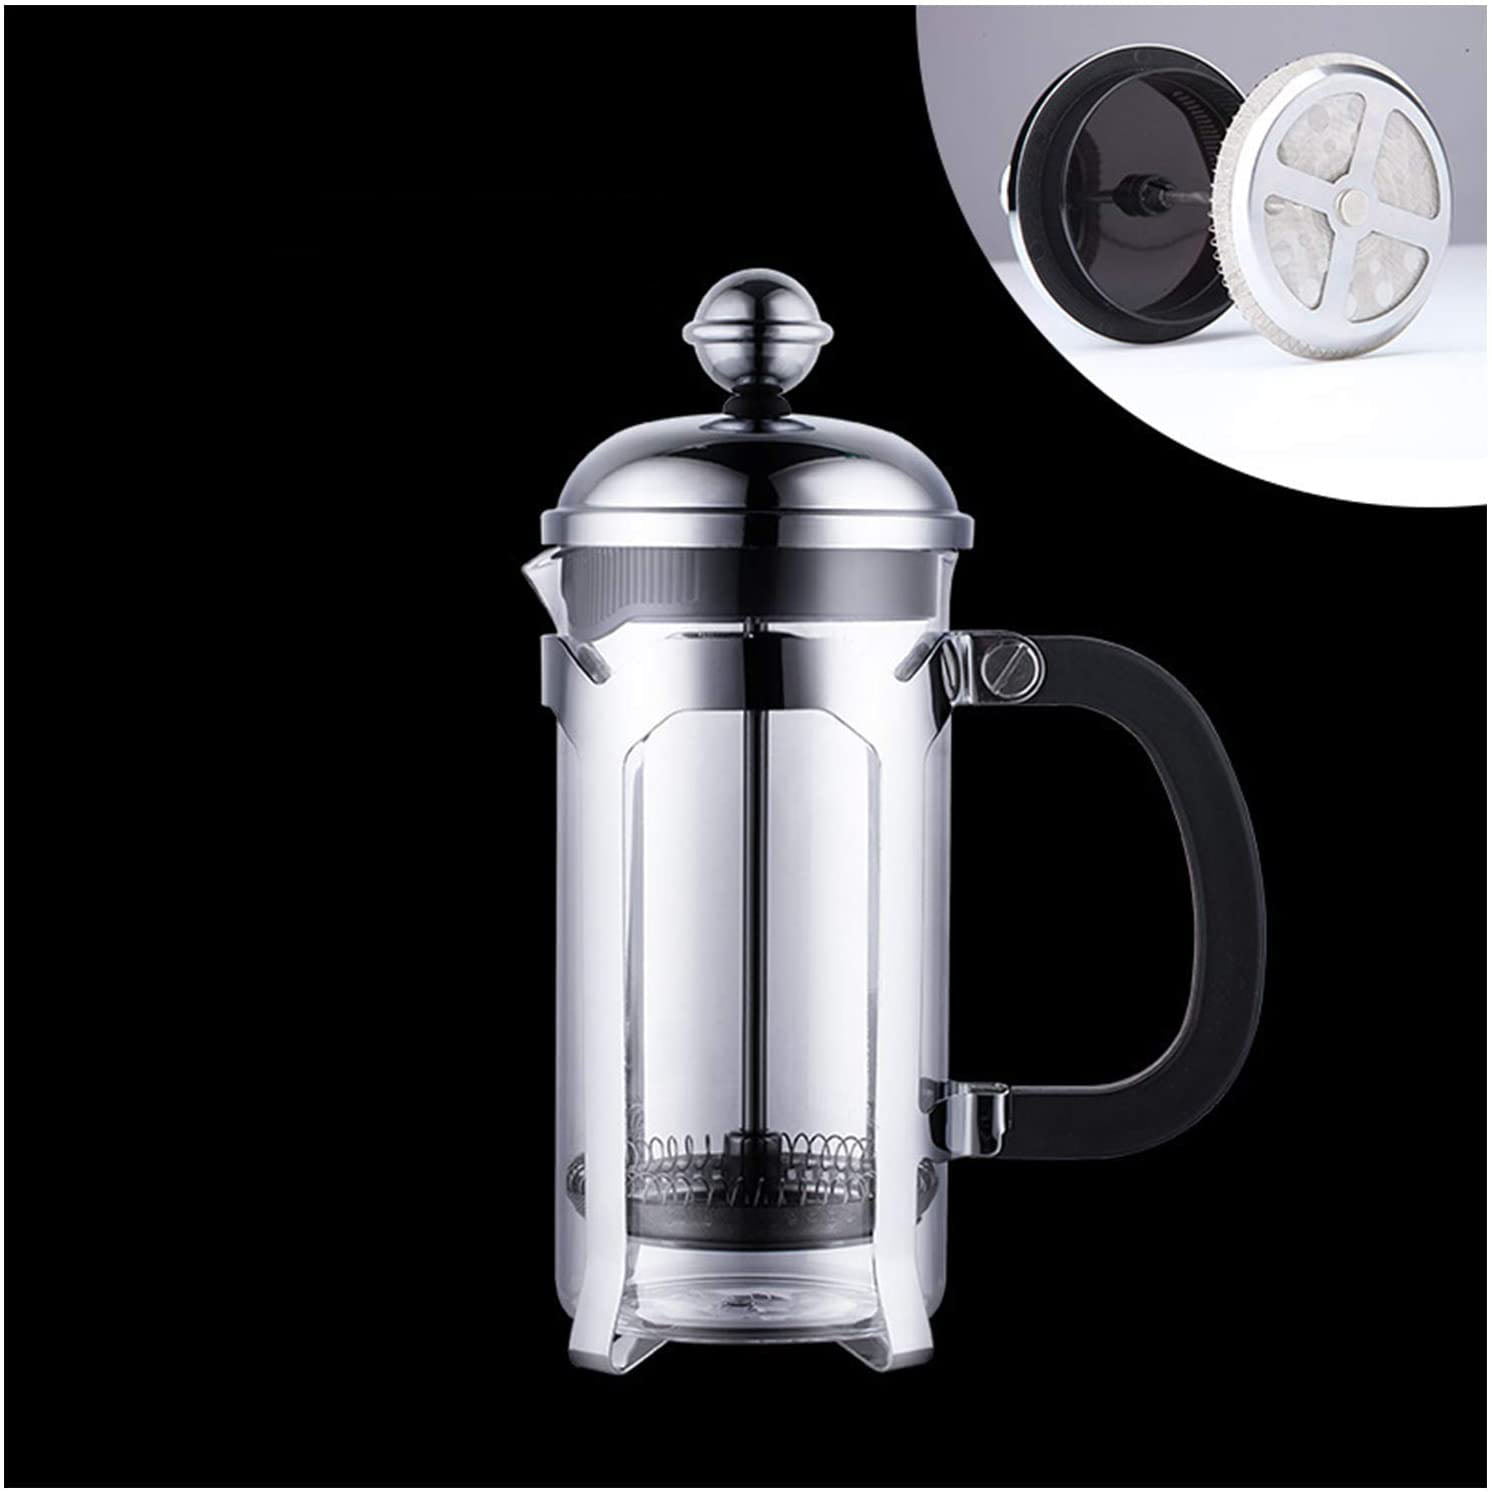 Heat Resistant Glass Carafe. 34oz French Press Coffee Maker Stainless Steel Filter Tea Maker Wincco Cafetiere 